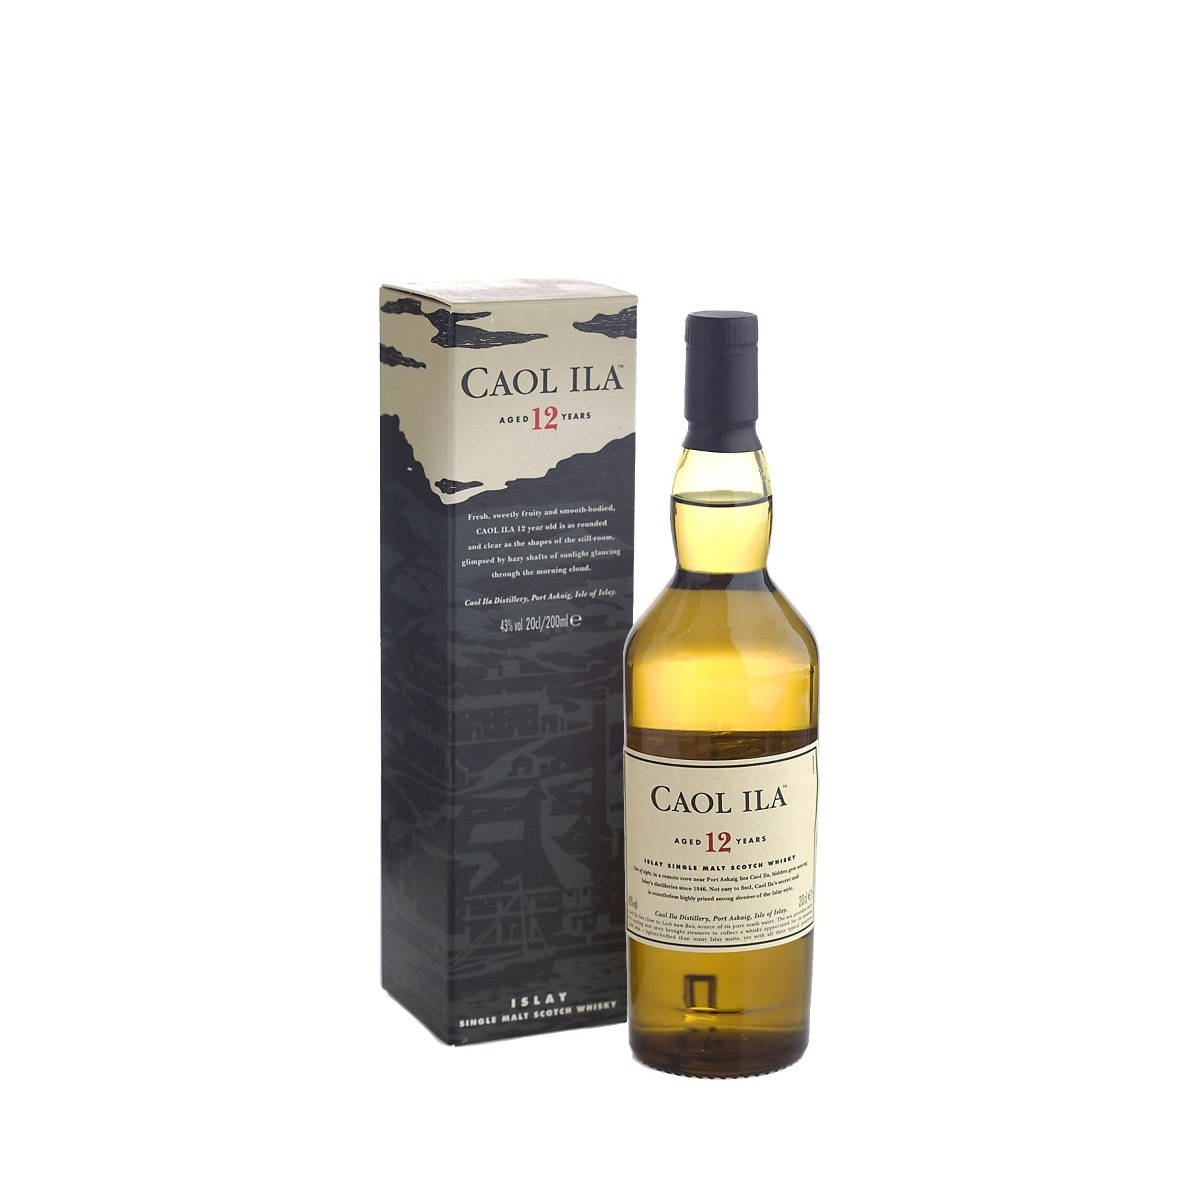 Luxurious bottle of Caol Ila 12-year-old Scotch whisky Wallpaper